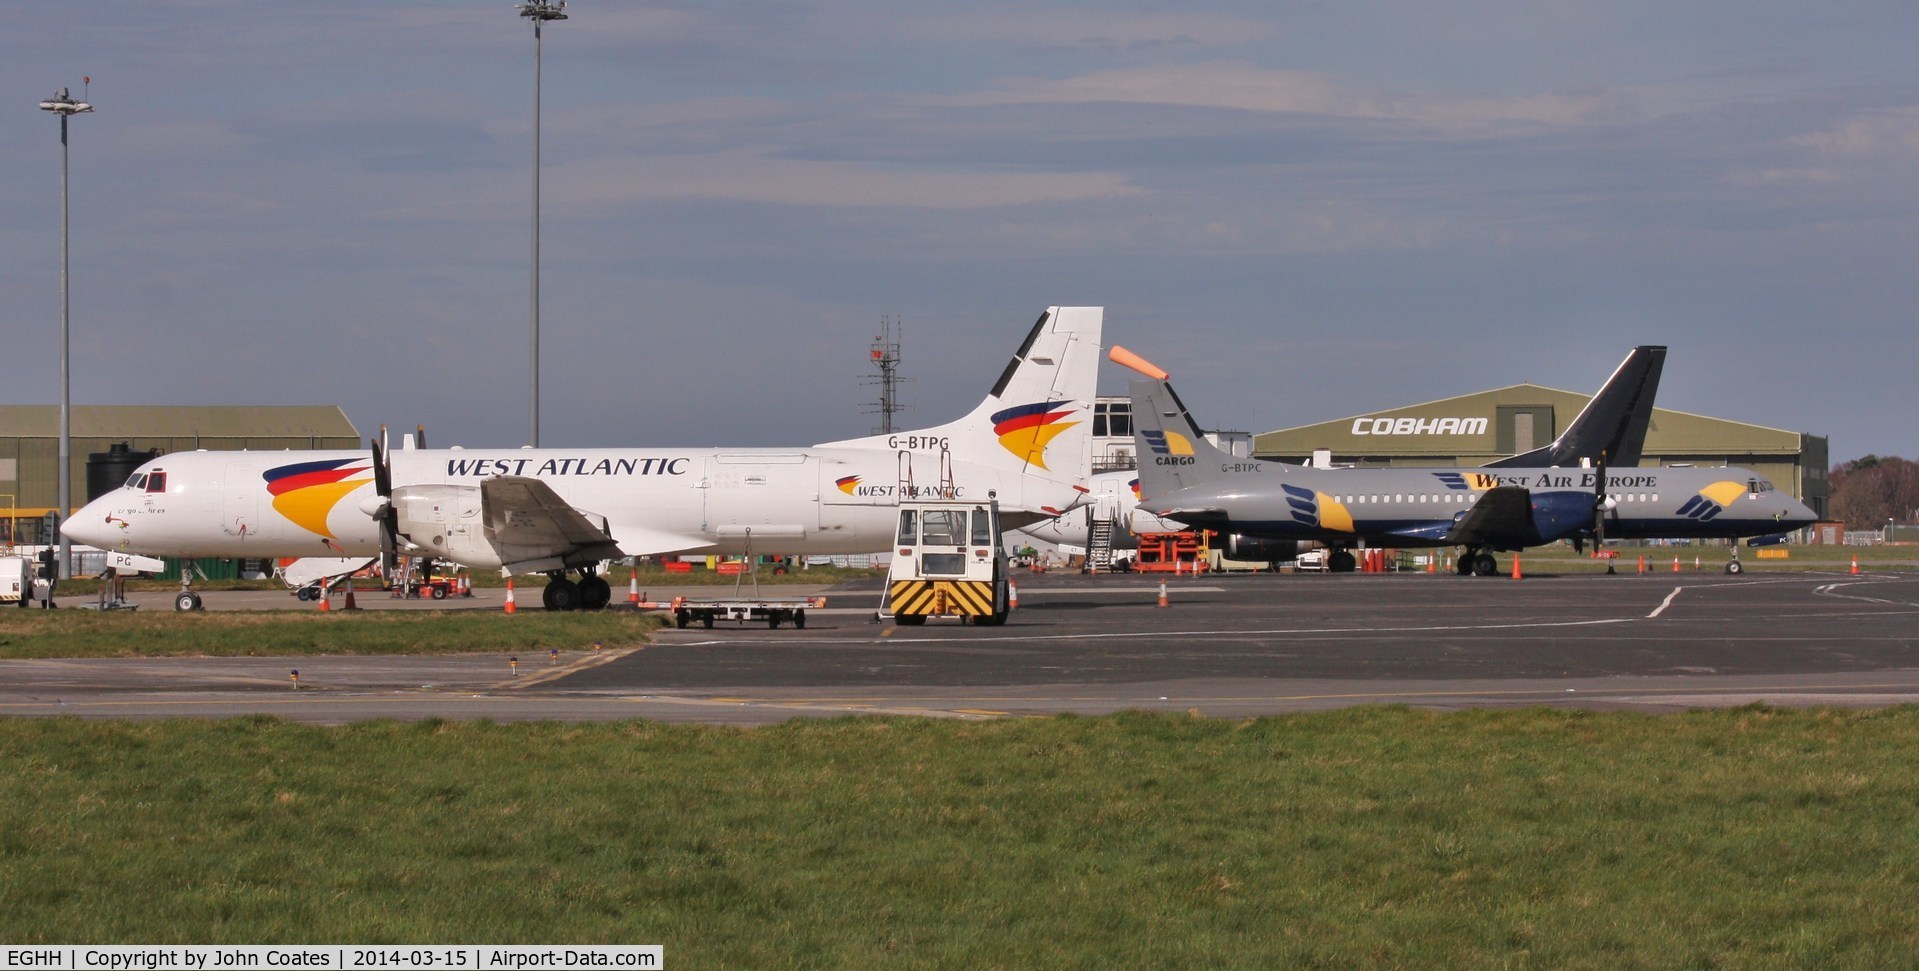 Bournemouth Airport, Bournemouth, England United Kingdom (EGHH) - West Atlantic and West Air Europe schemes.